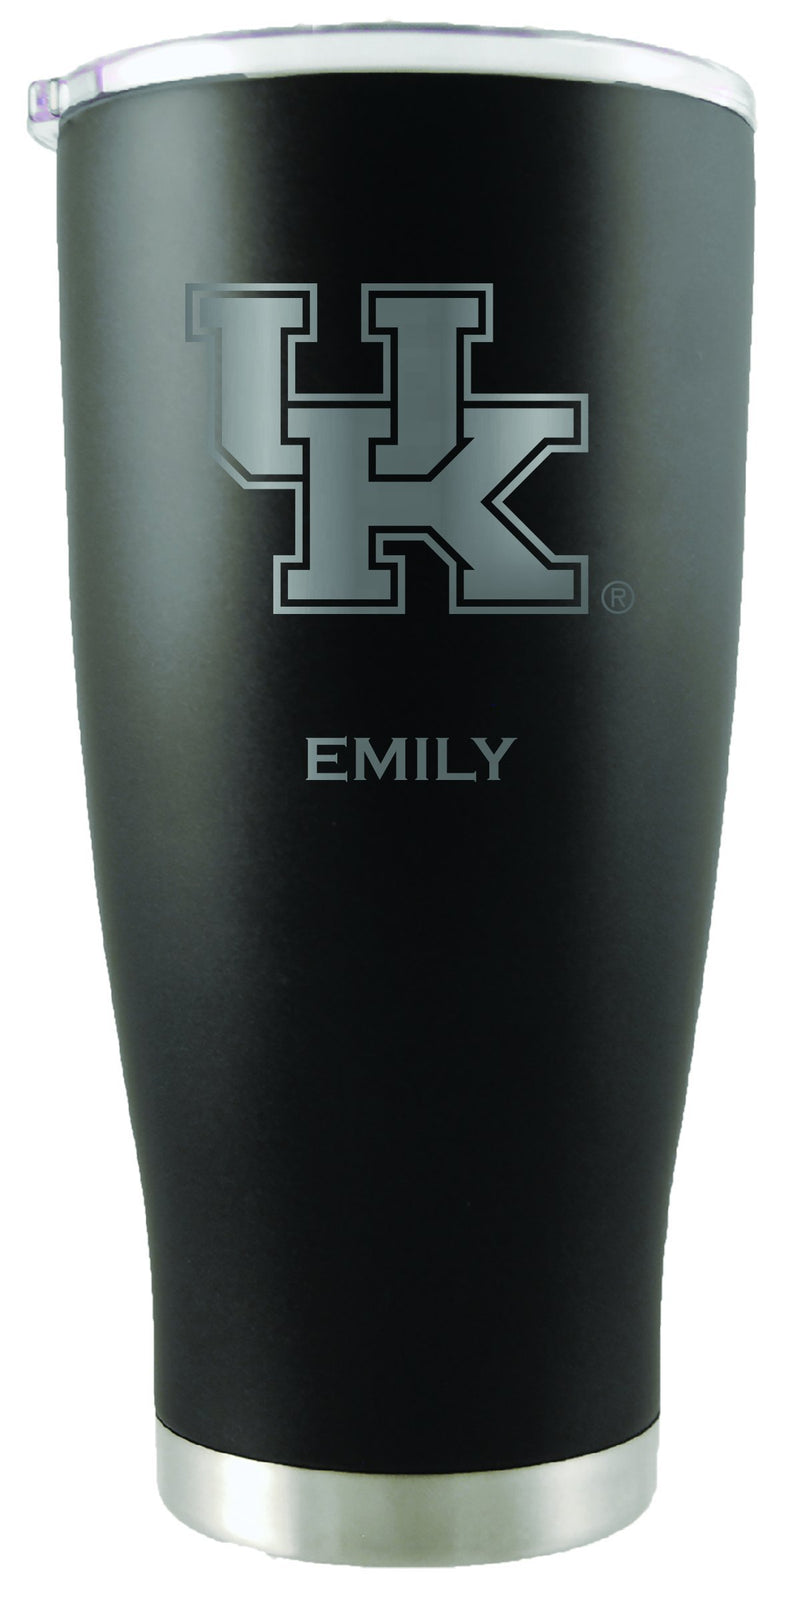 20oz Black Personalized Stainless Steel Tumbler | Kentucky
COL, CurrentProduct, Drinkware_category_All, Kentucky Wildcats, KY, Personalized_Personalized
The Memory Company